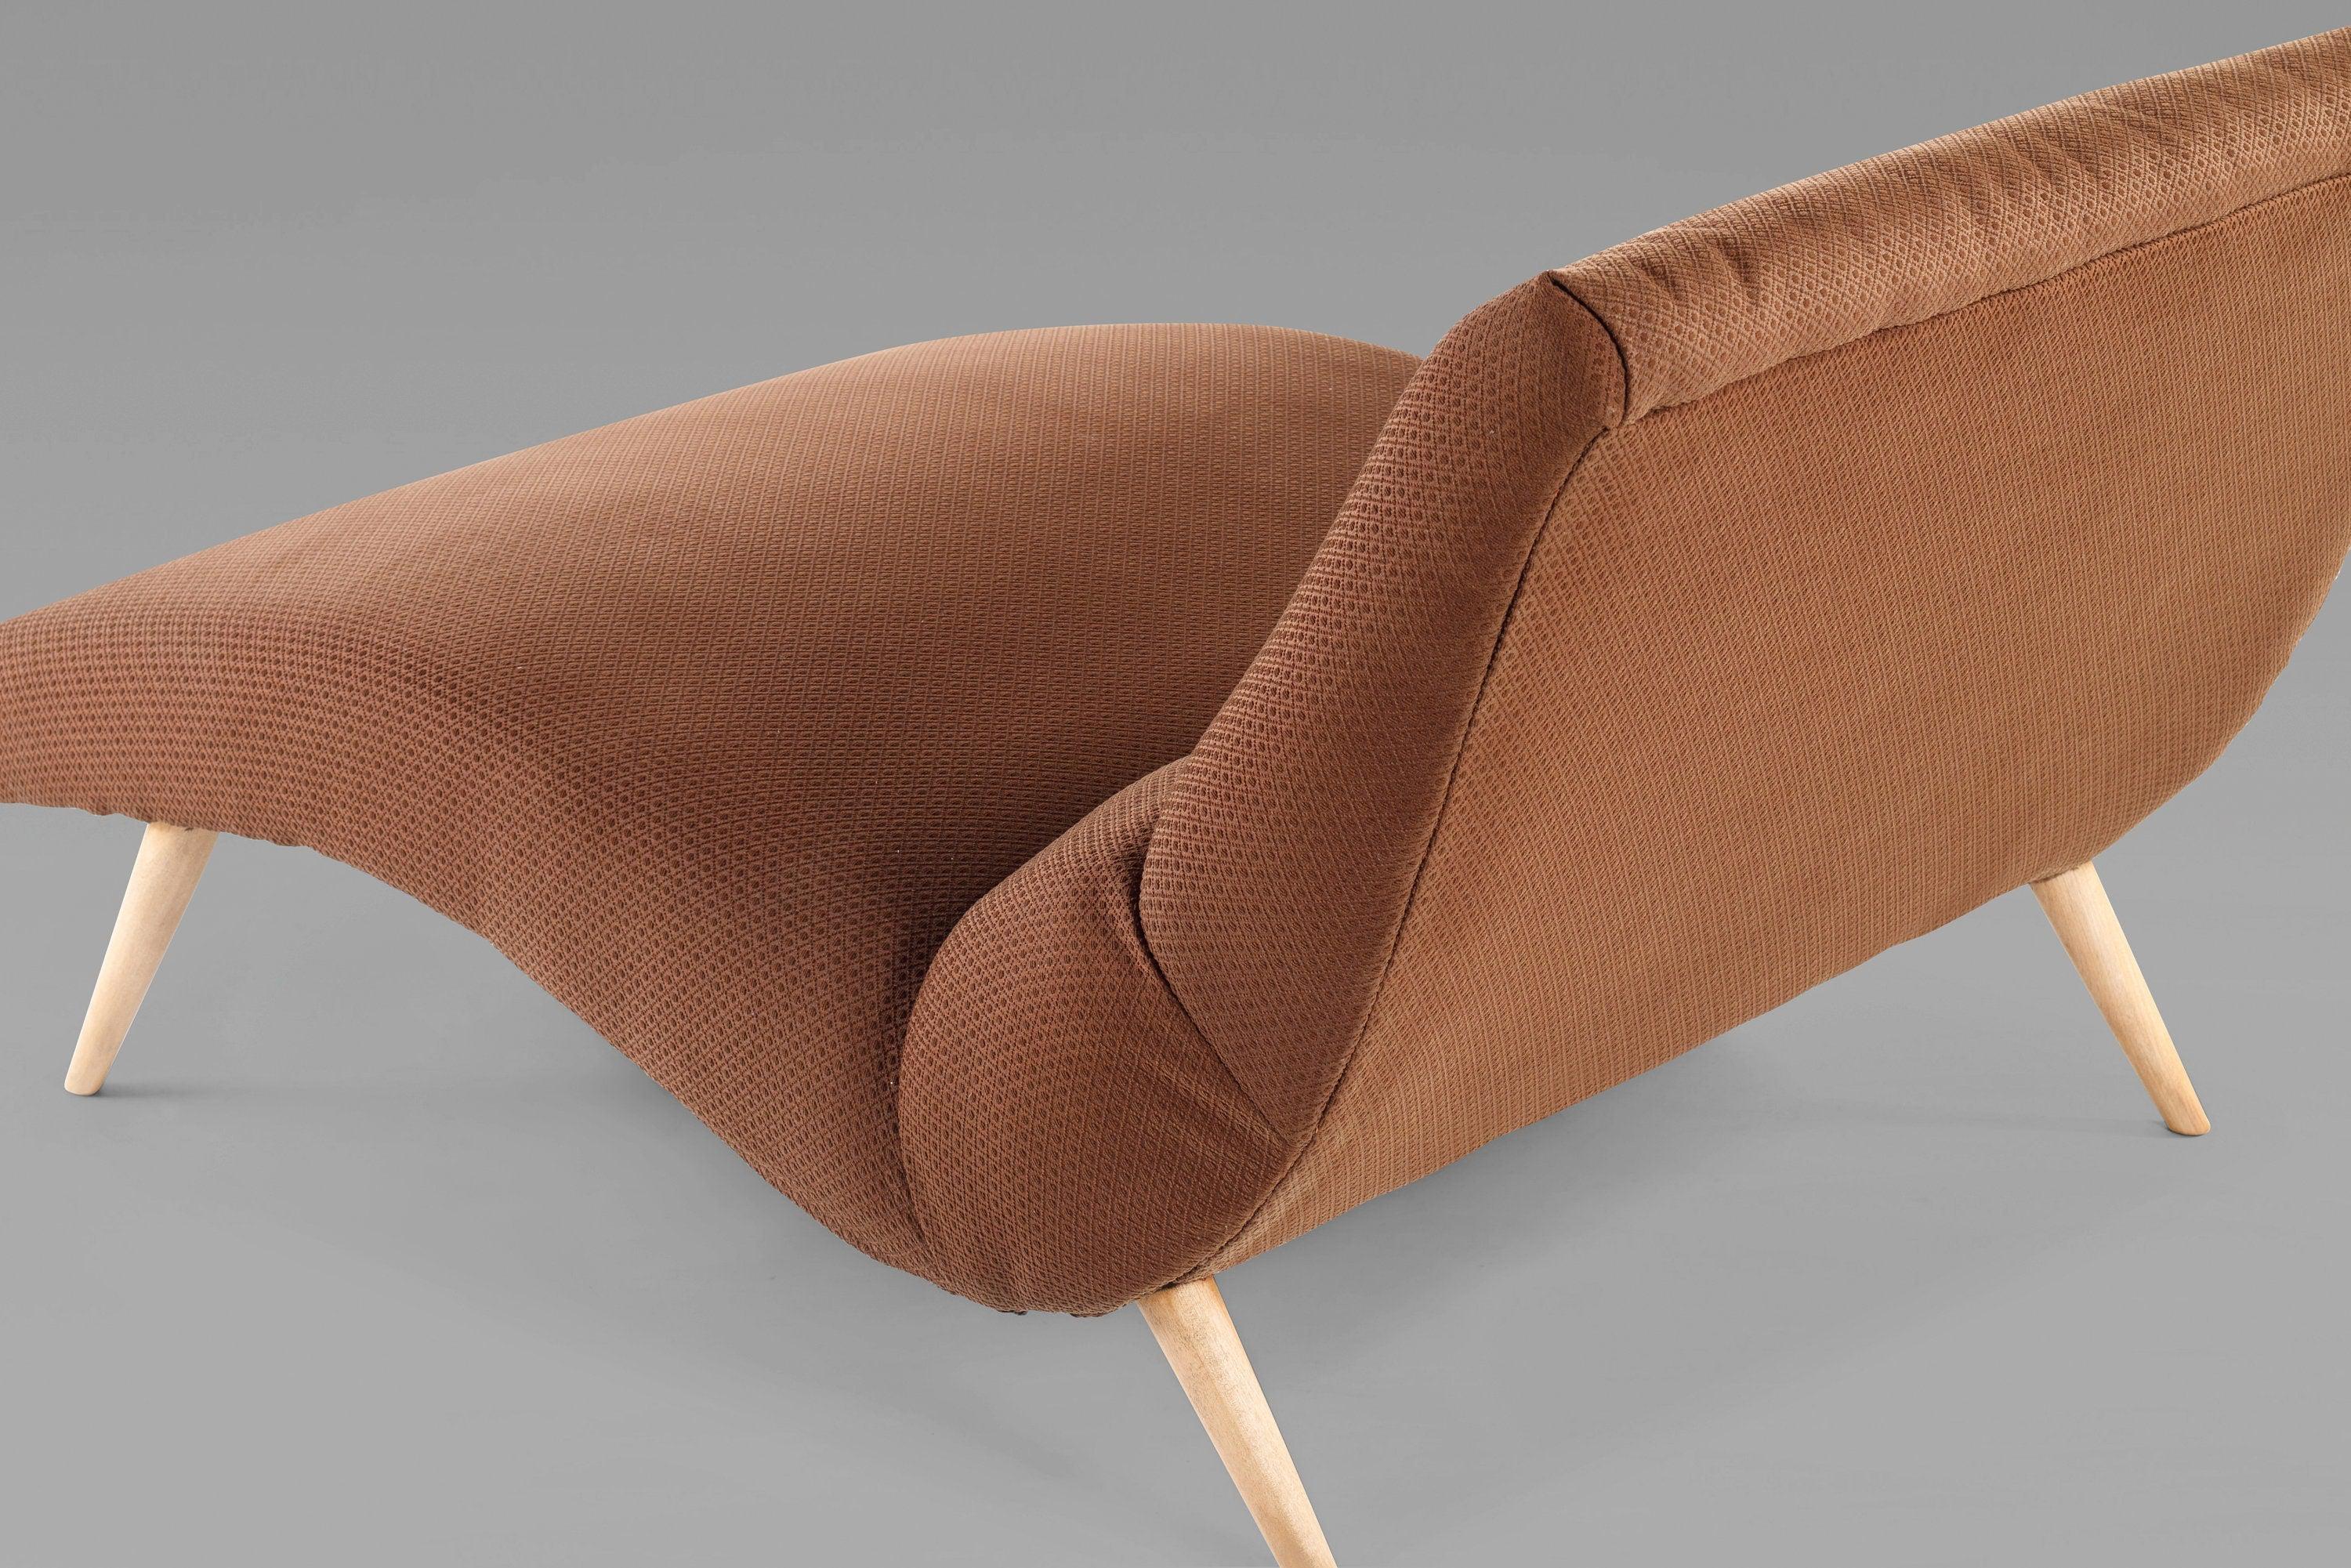 Mid-20th Century Architectural Wave Chaise Lounge Chair by Lawrence Peabody for Selig, c. 1960s For Sale